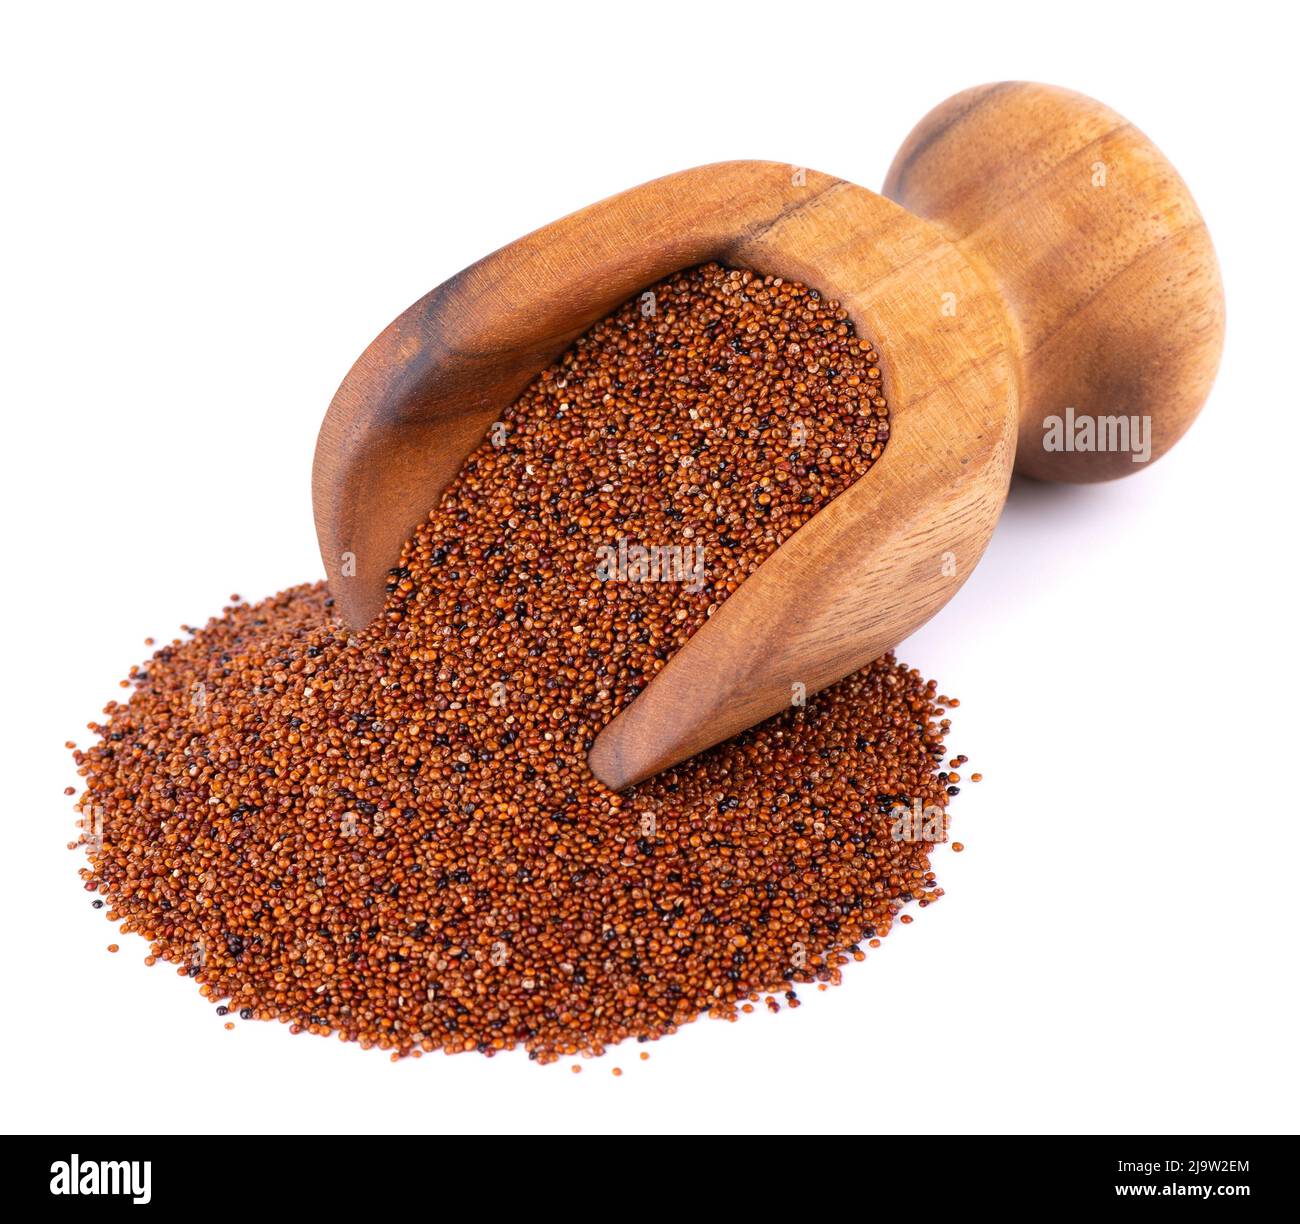 Canihua grains isolated on white background. Pile of qaniwa in wooden scoop. Dry grains of chenopodium pallidicaule Stock Photo